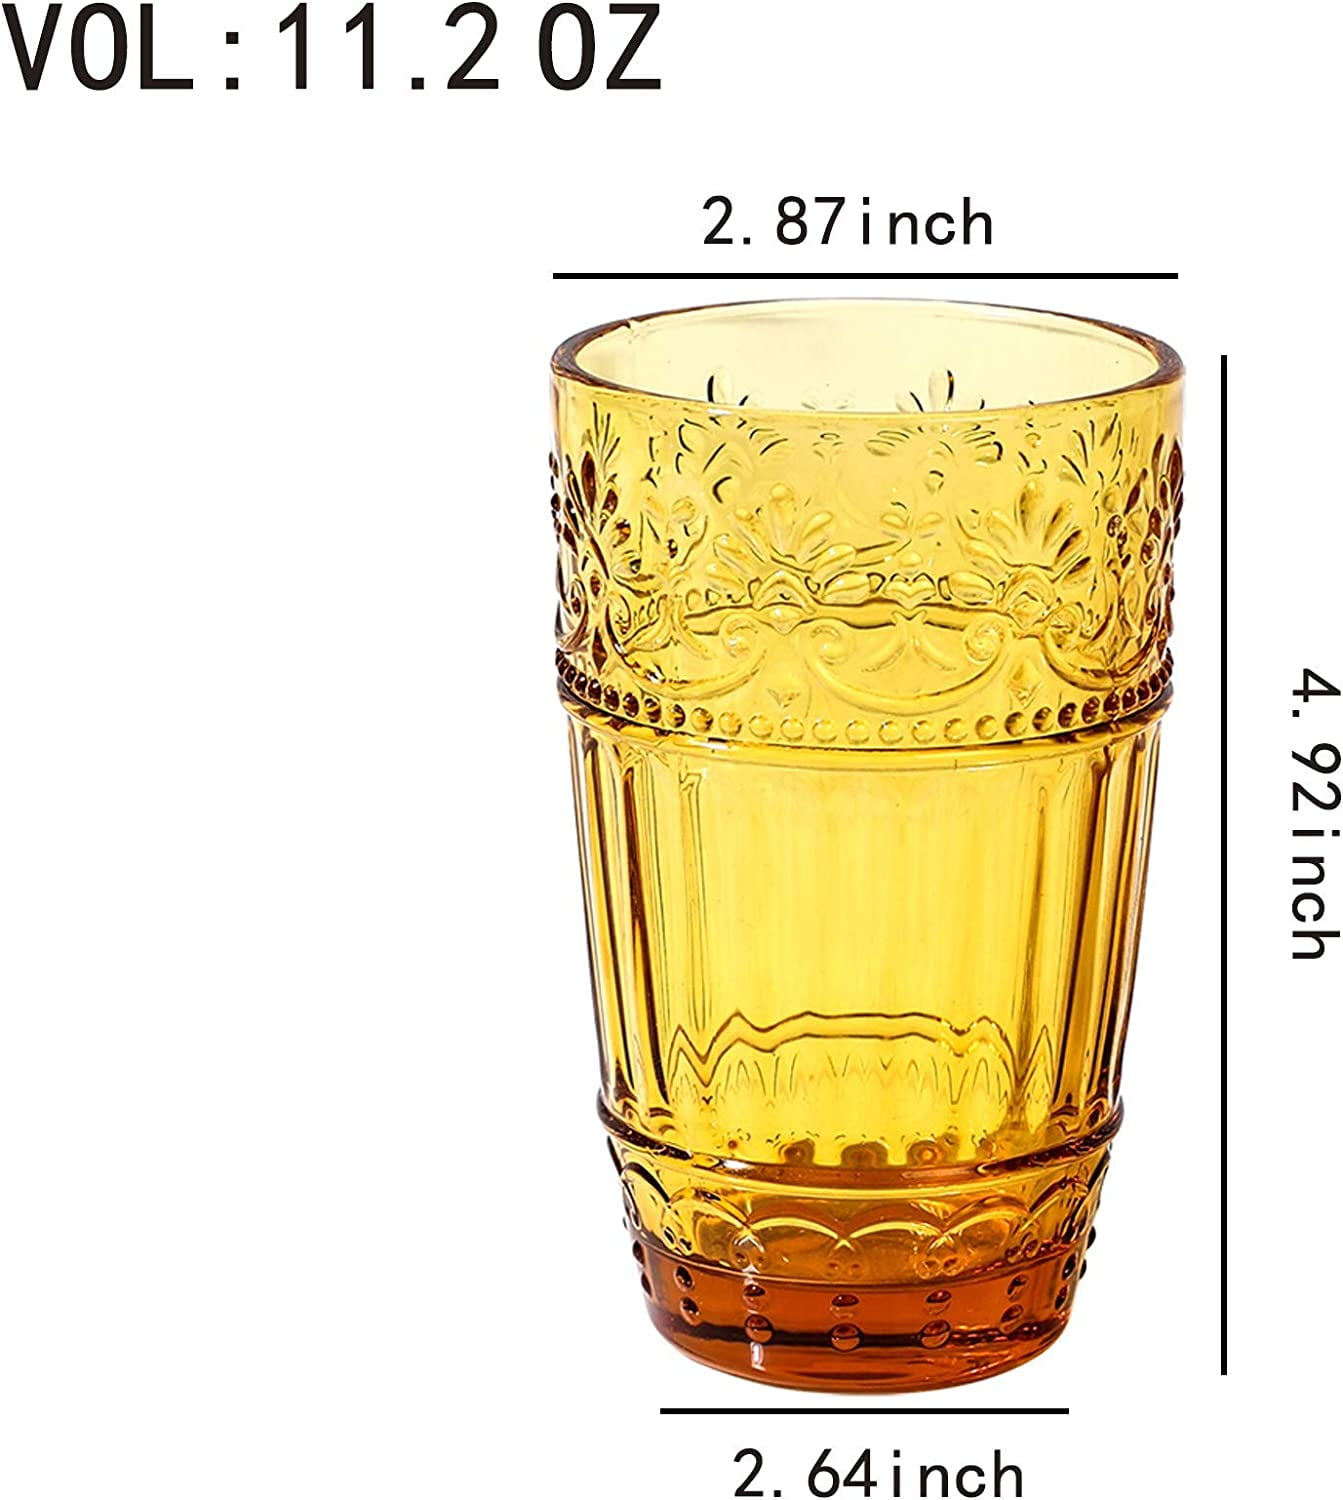 Storied Home 12 oz. Embossed Drinking Glass (Set of 4) DF4129SET